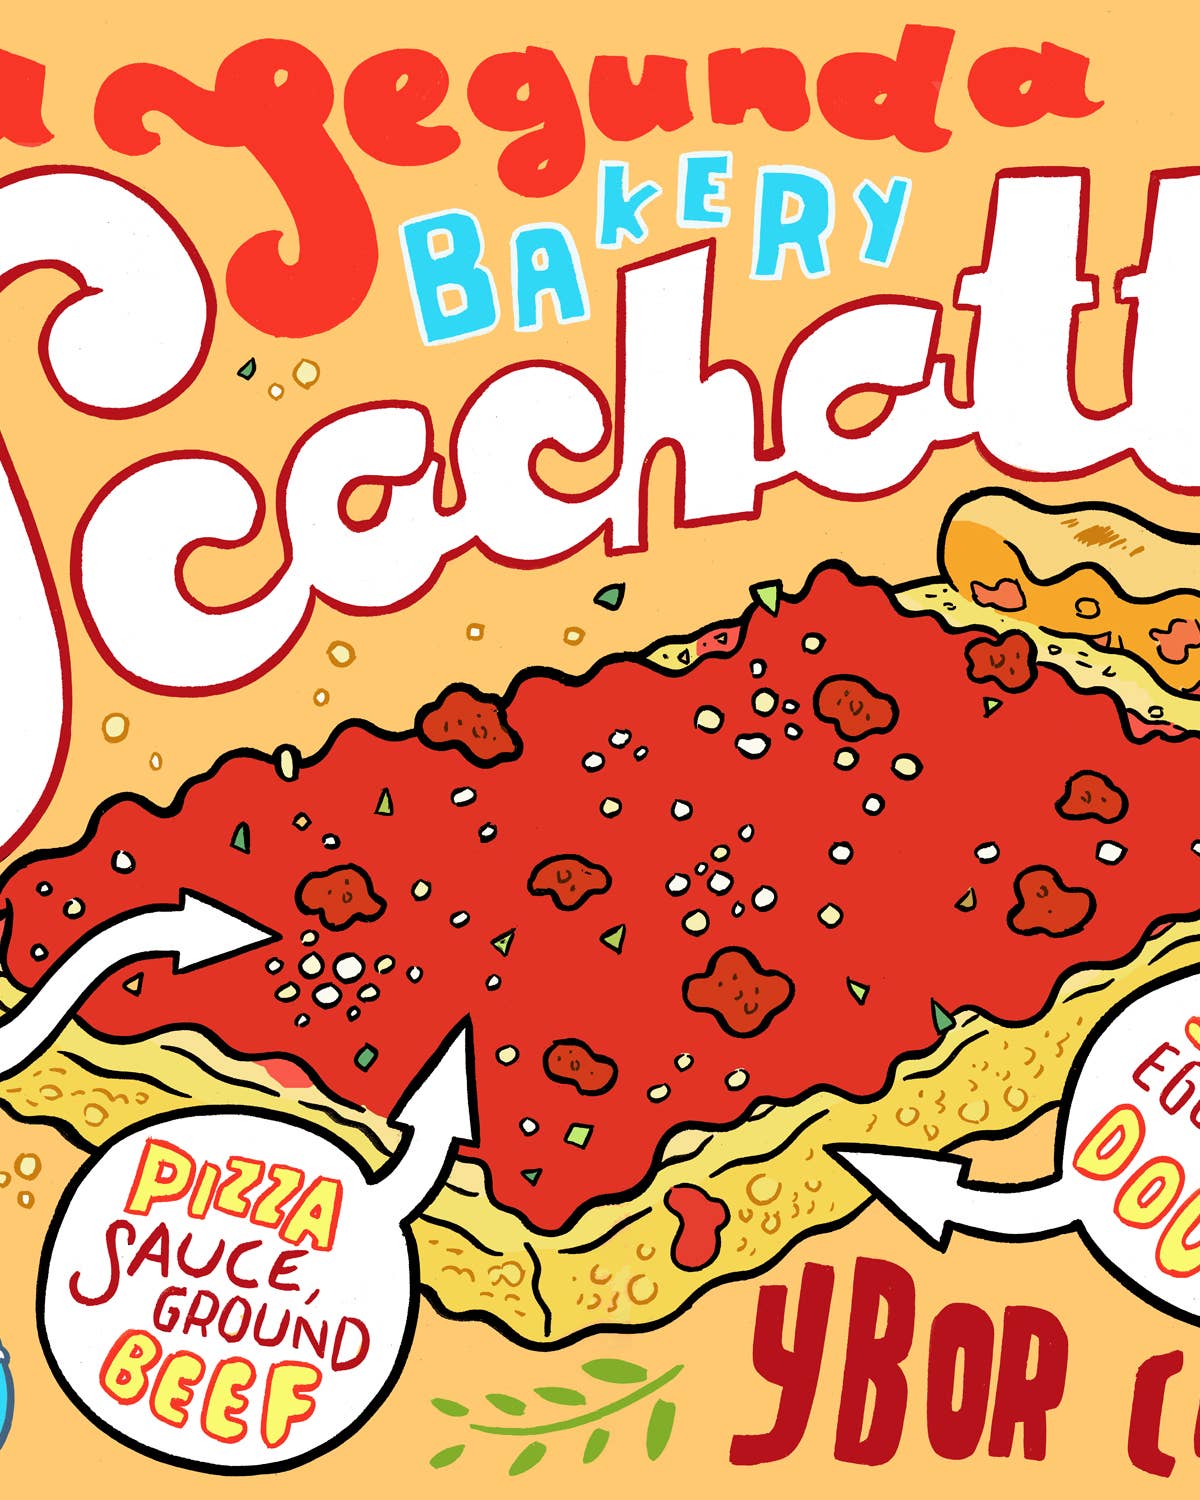 Where to Eat Scachatta, the Weird Cuban-Sicilian Pizza You’ll Only Find in Florida